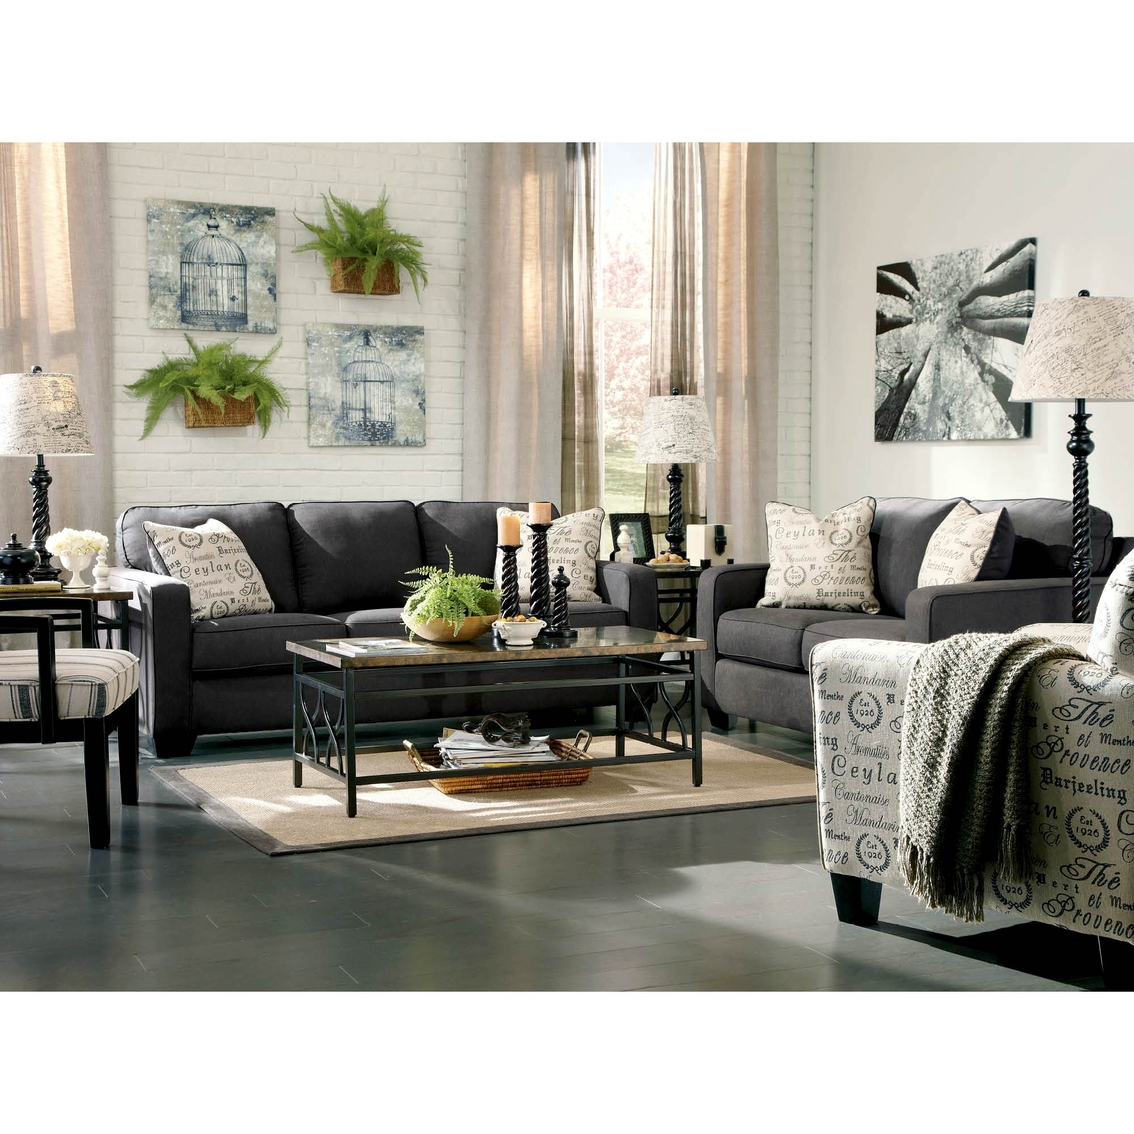 Signature Design by Ashley Alenya Loveseat, Charcoal - Image 4 of 4